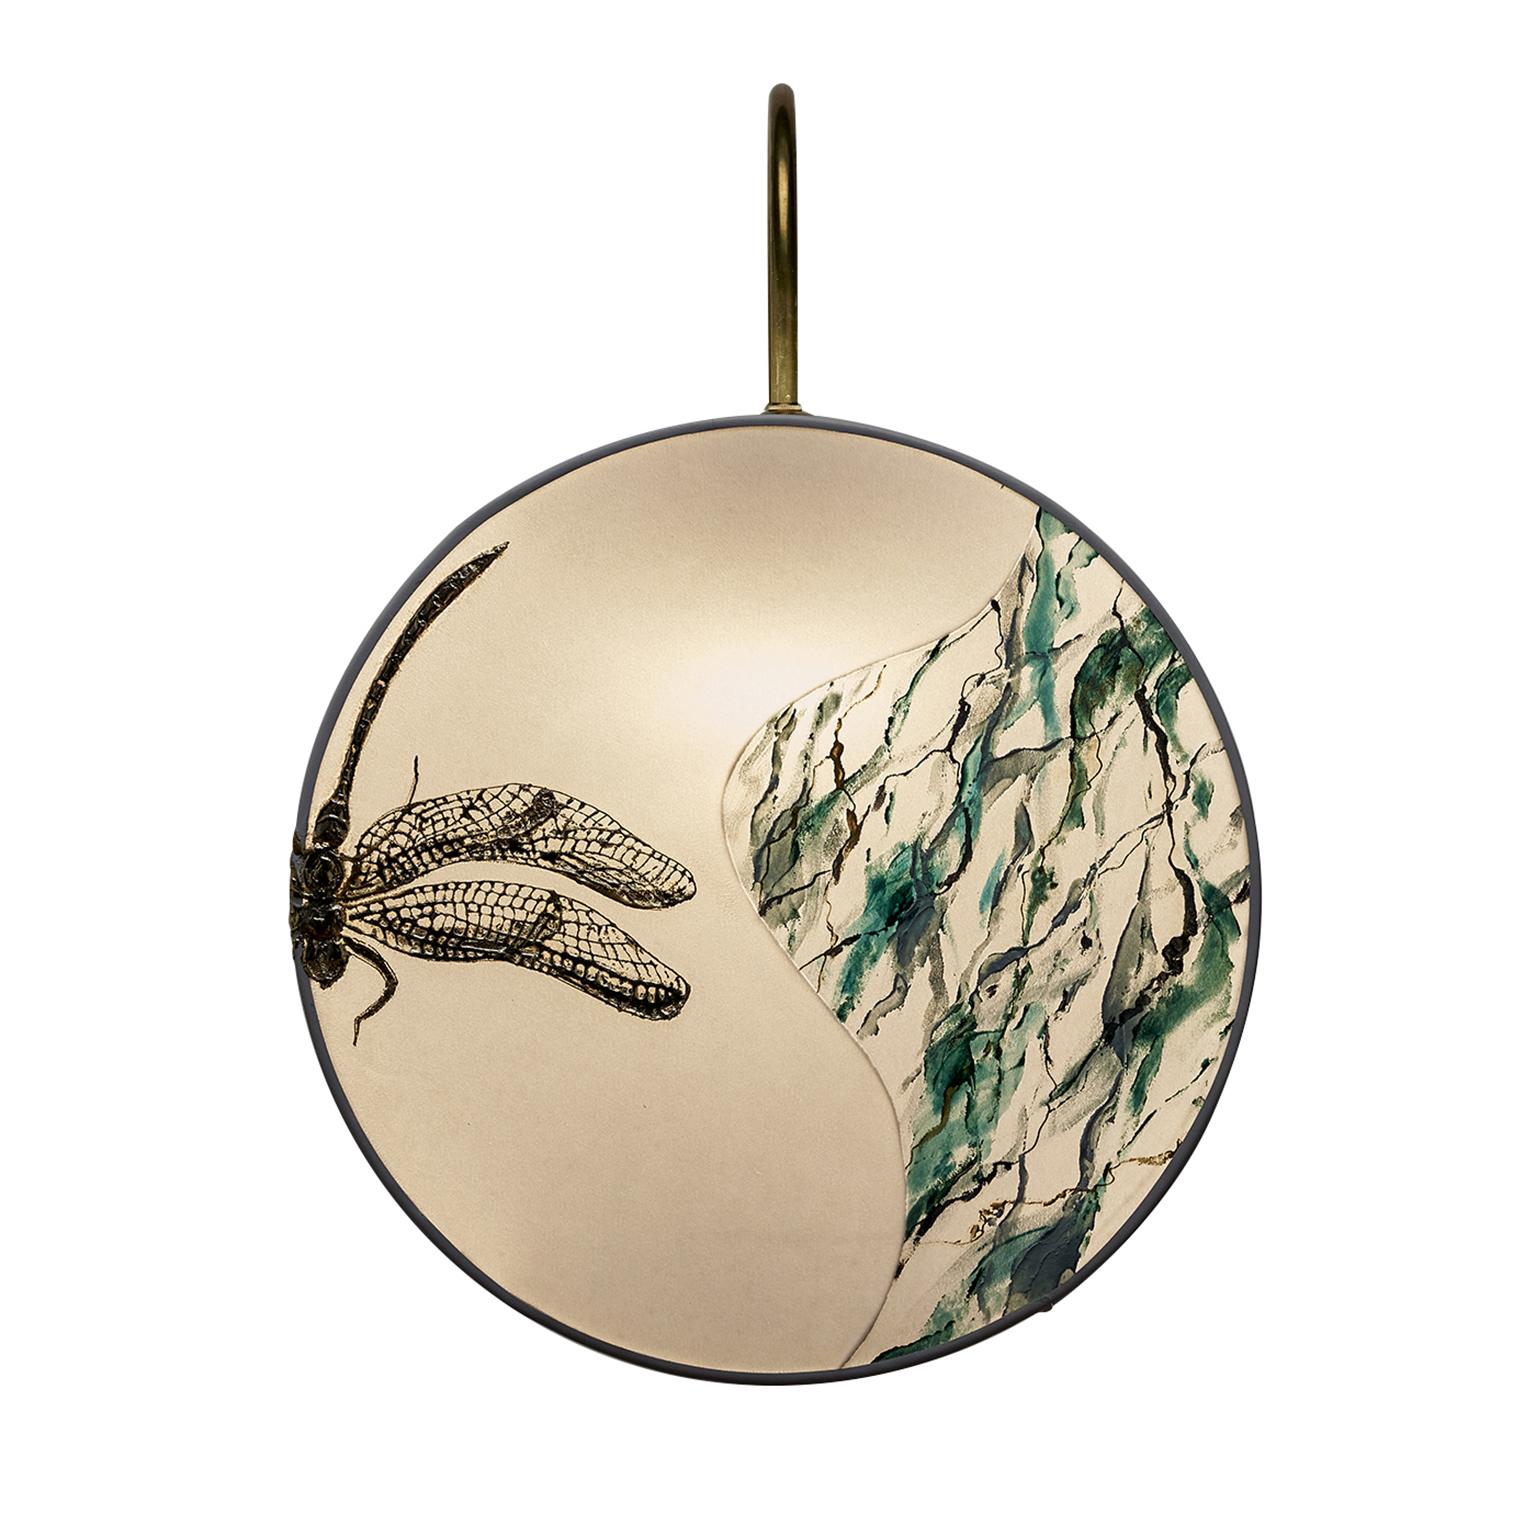 Dragonfly Pattern Sconce Lamps Handmade Velvet and Natural Brass, Marbled-Effect In New Condition For Sale In Campolongo Maggiore, IT